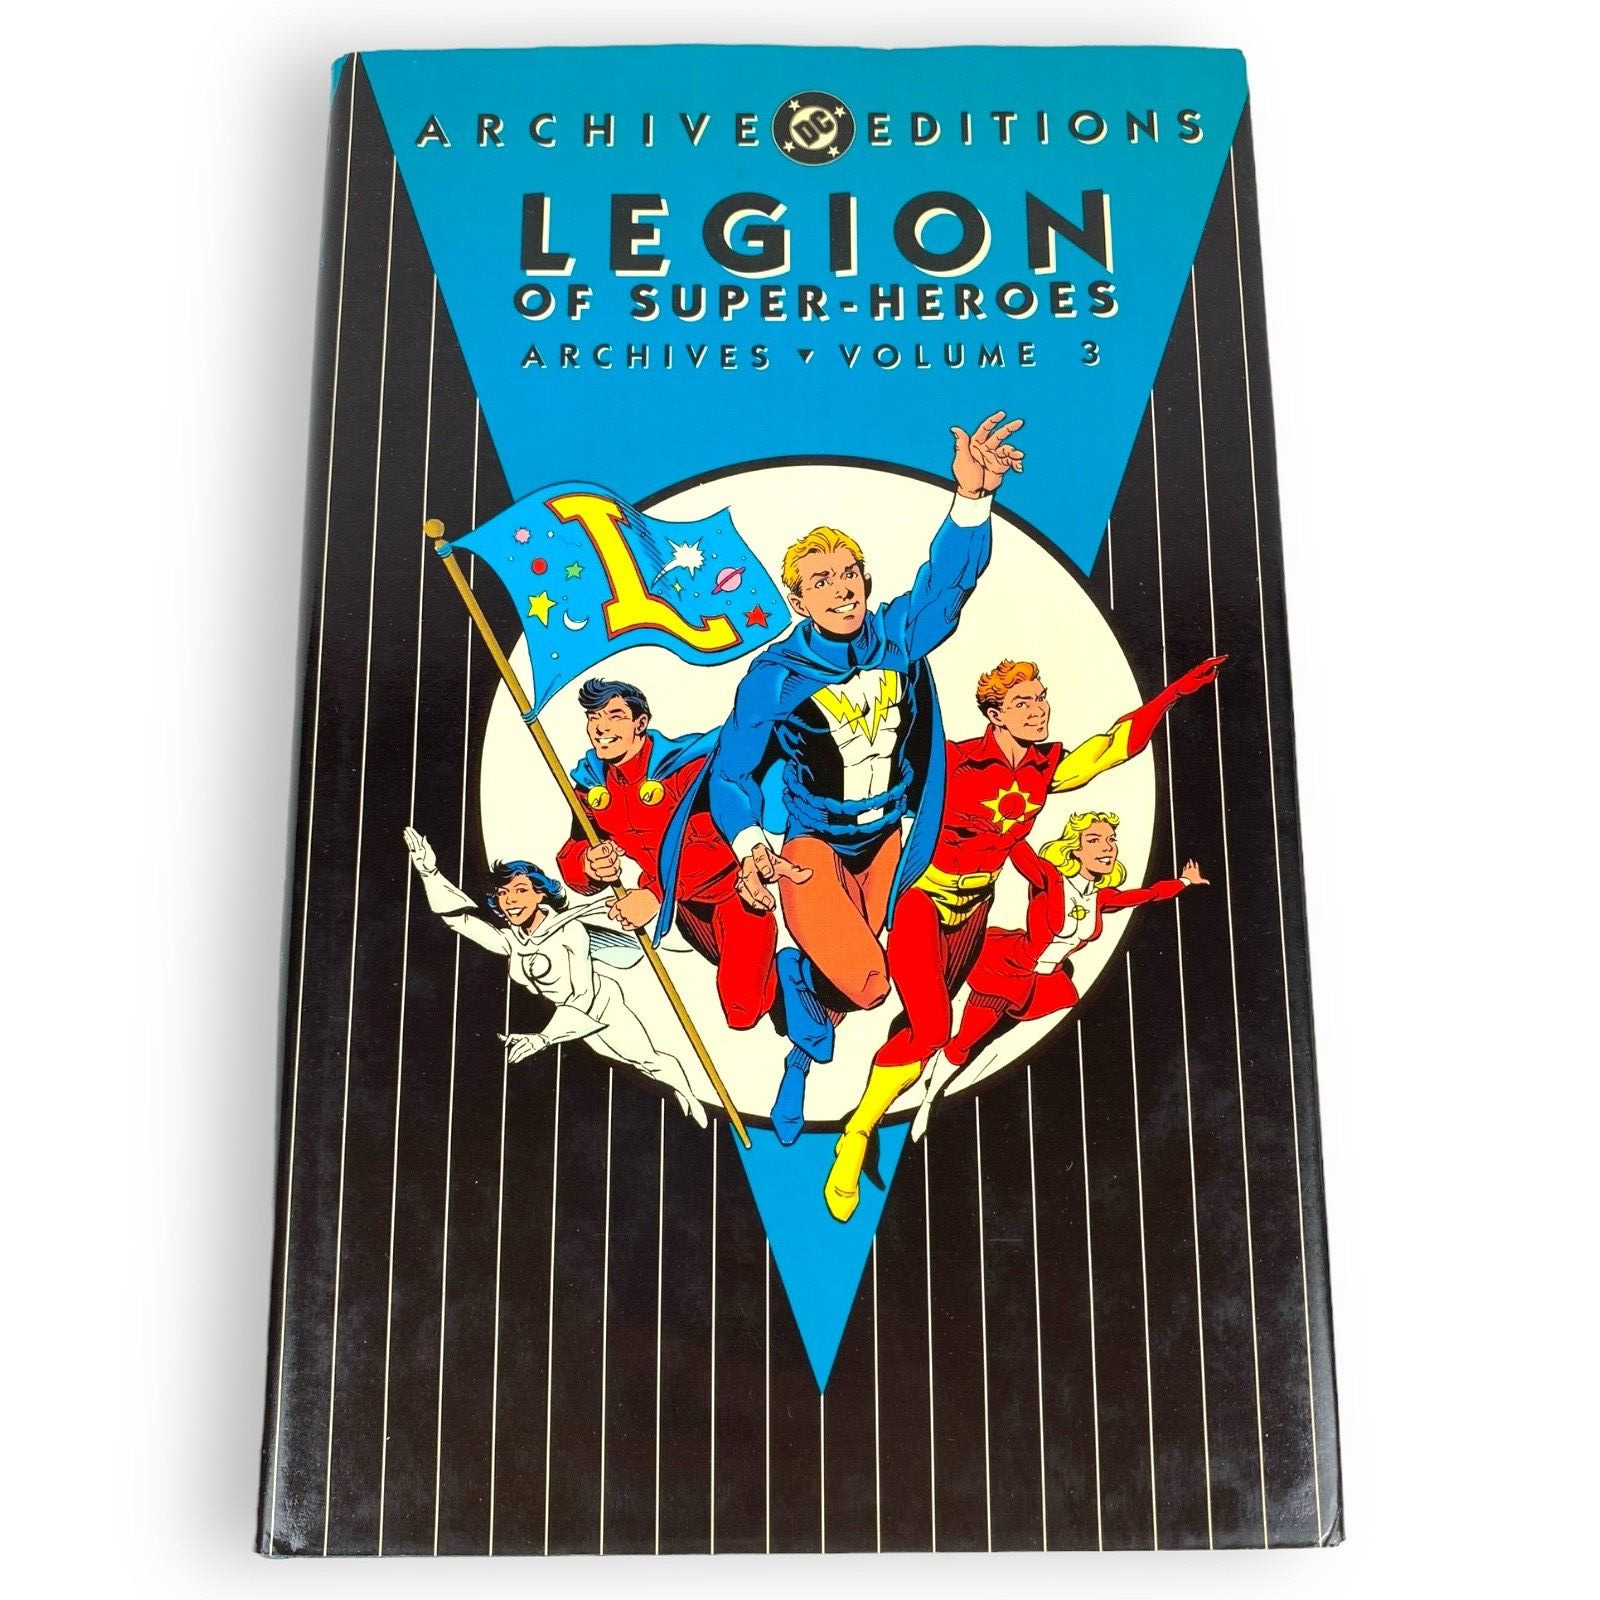 DC Archive Editions Legion of Super-Heroes Archives Volume 3